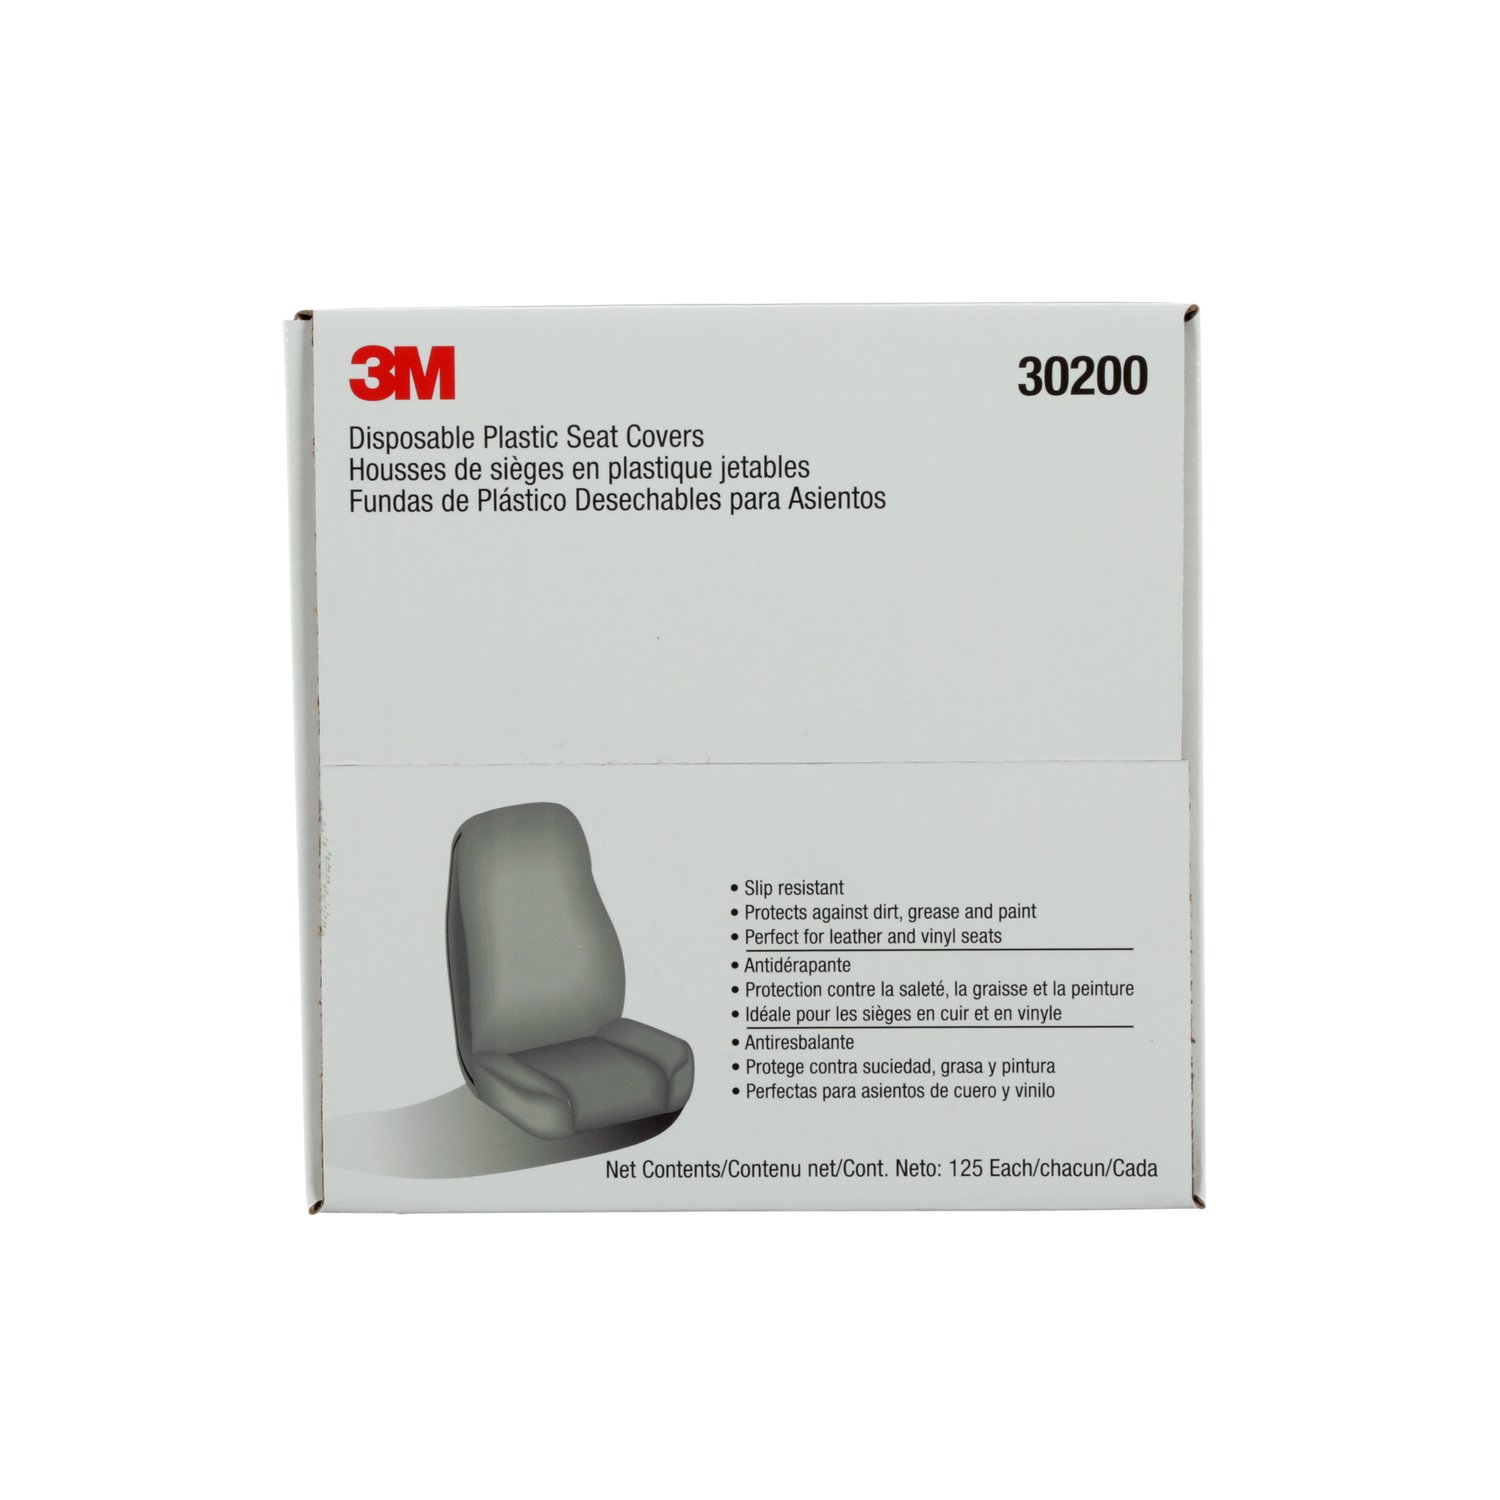 3M™ Double Coated Tape 9832, Clear, 1 1/2 in x 60 yd, 4.8 mil, 24 rolls per  case